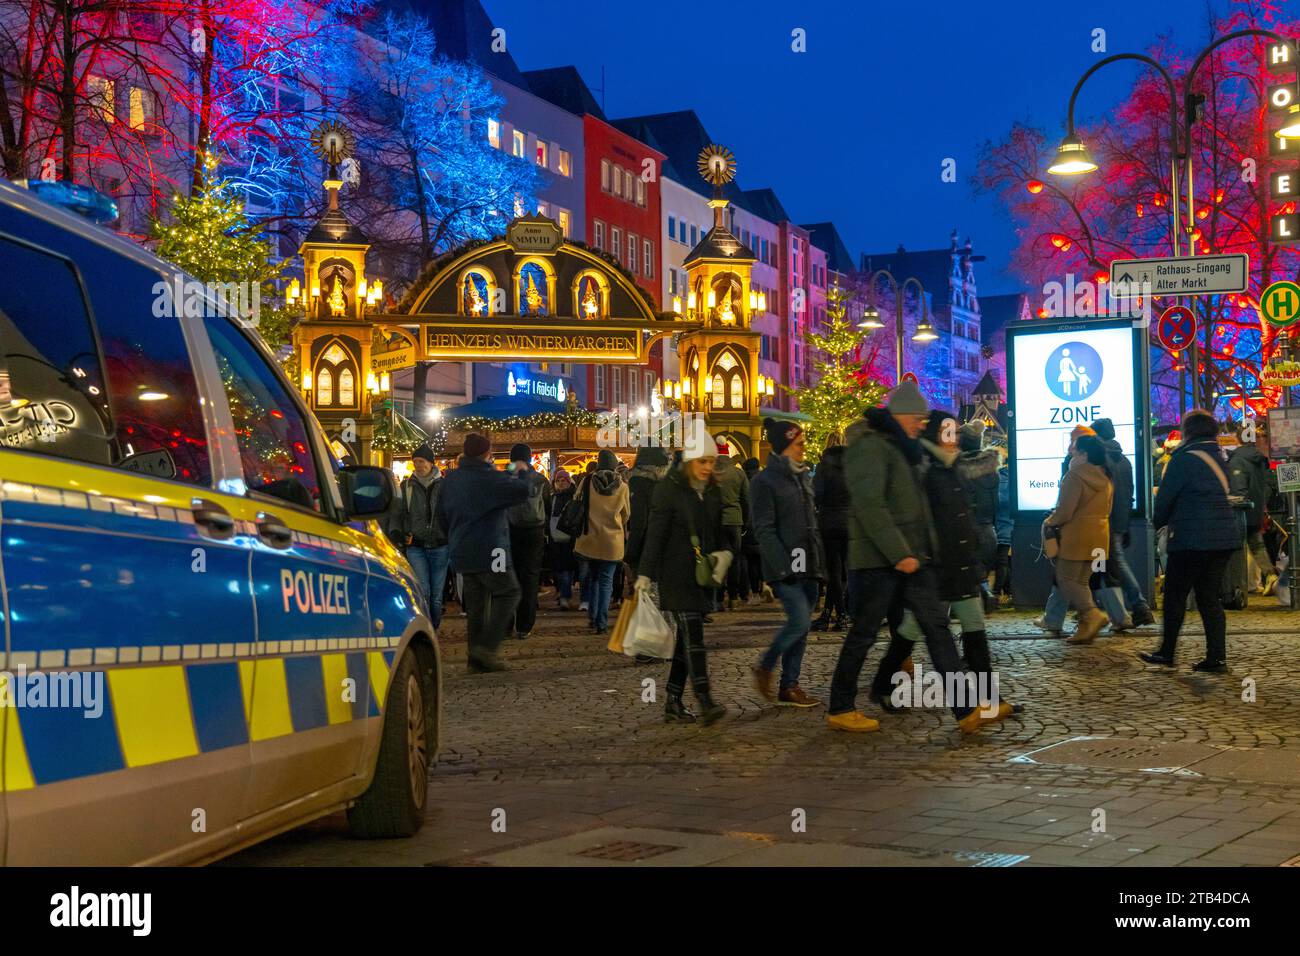 Police patrol car in front of the Christmas market on the Alter Markt in the old town of Cologne, Sunday shopping in Cologne city centre, 1st Advent w Stock Photo